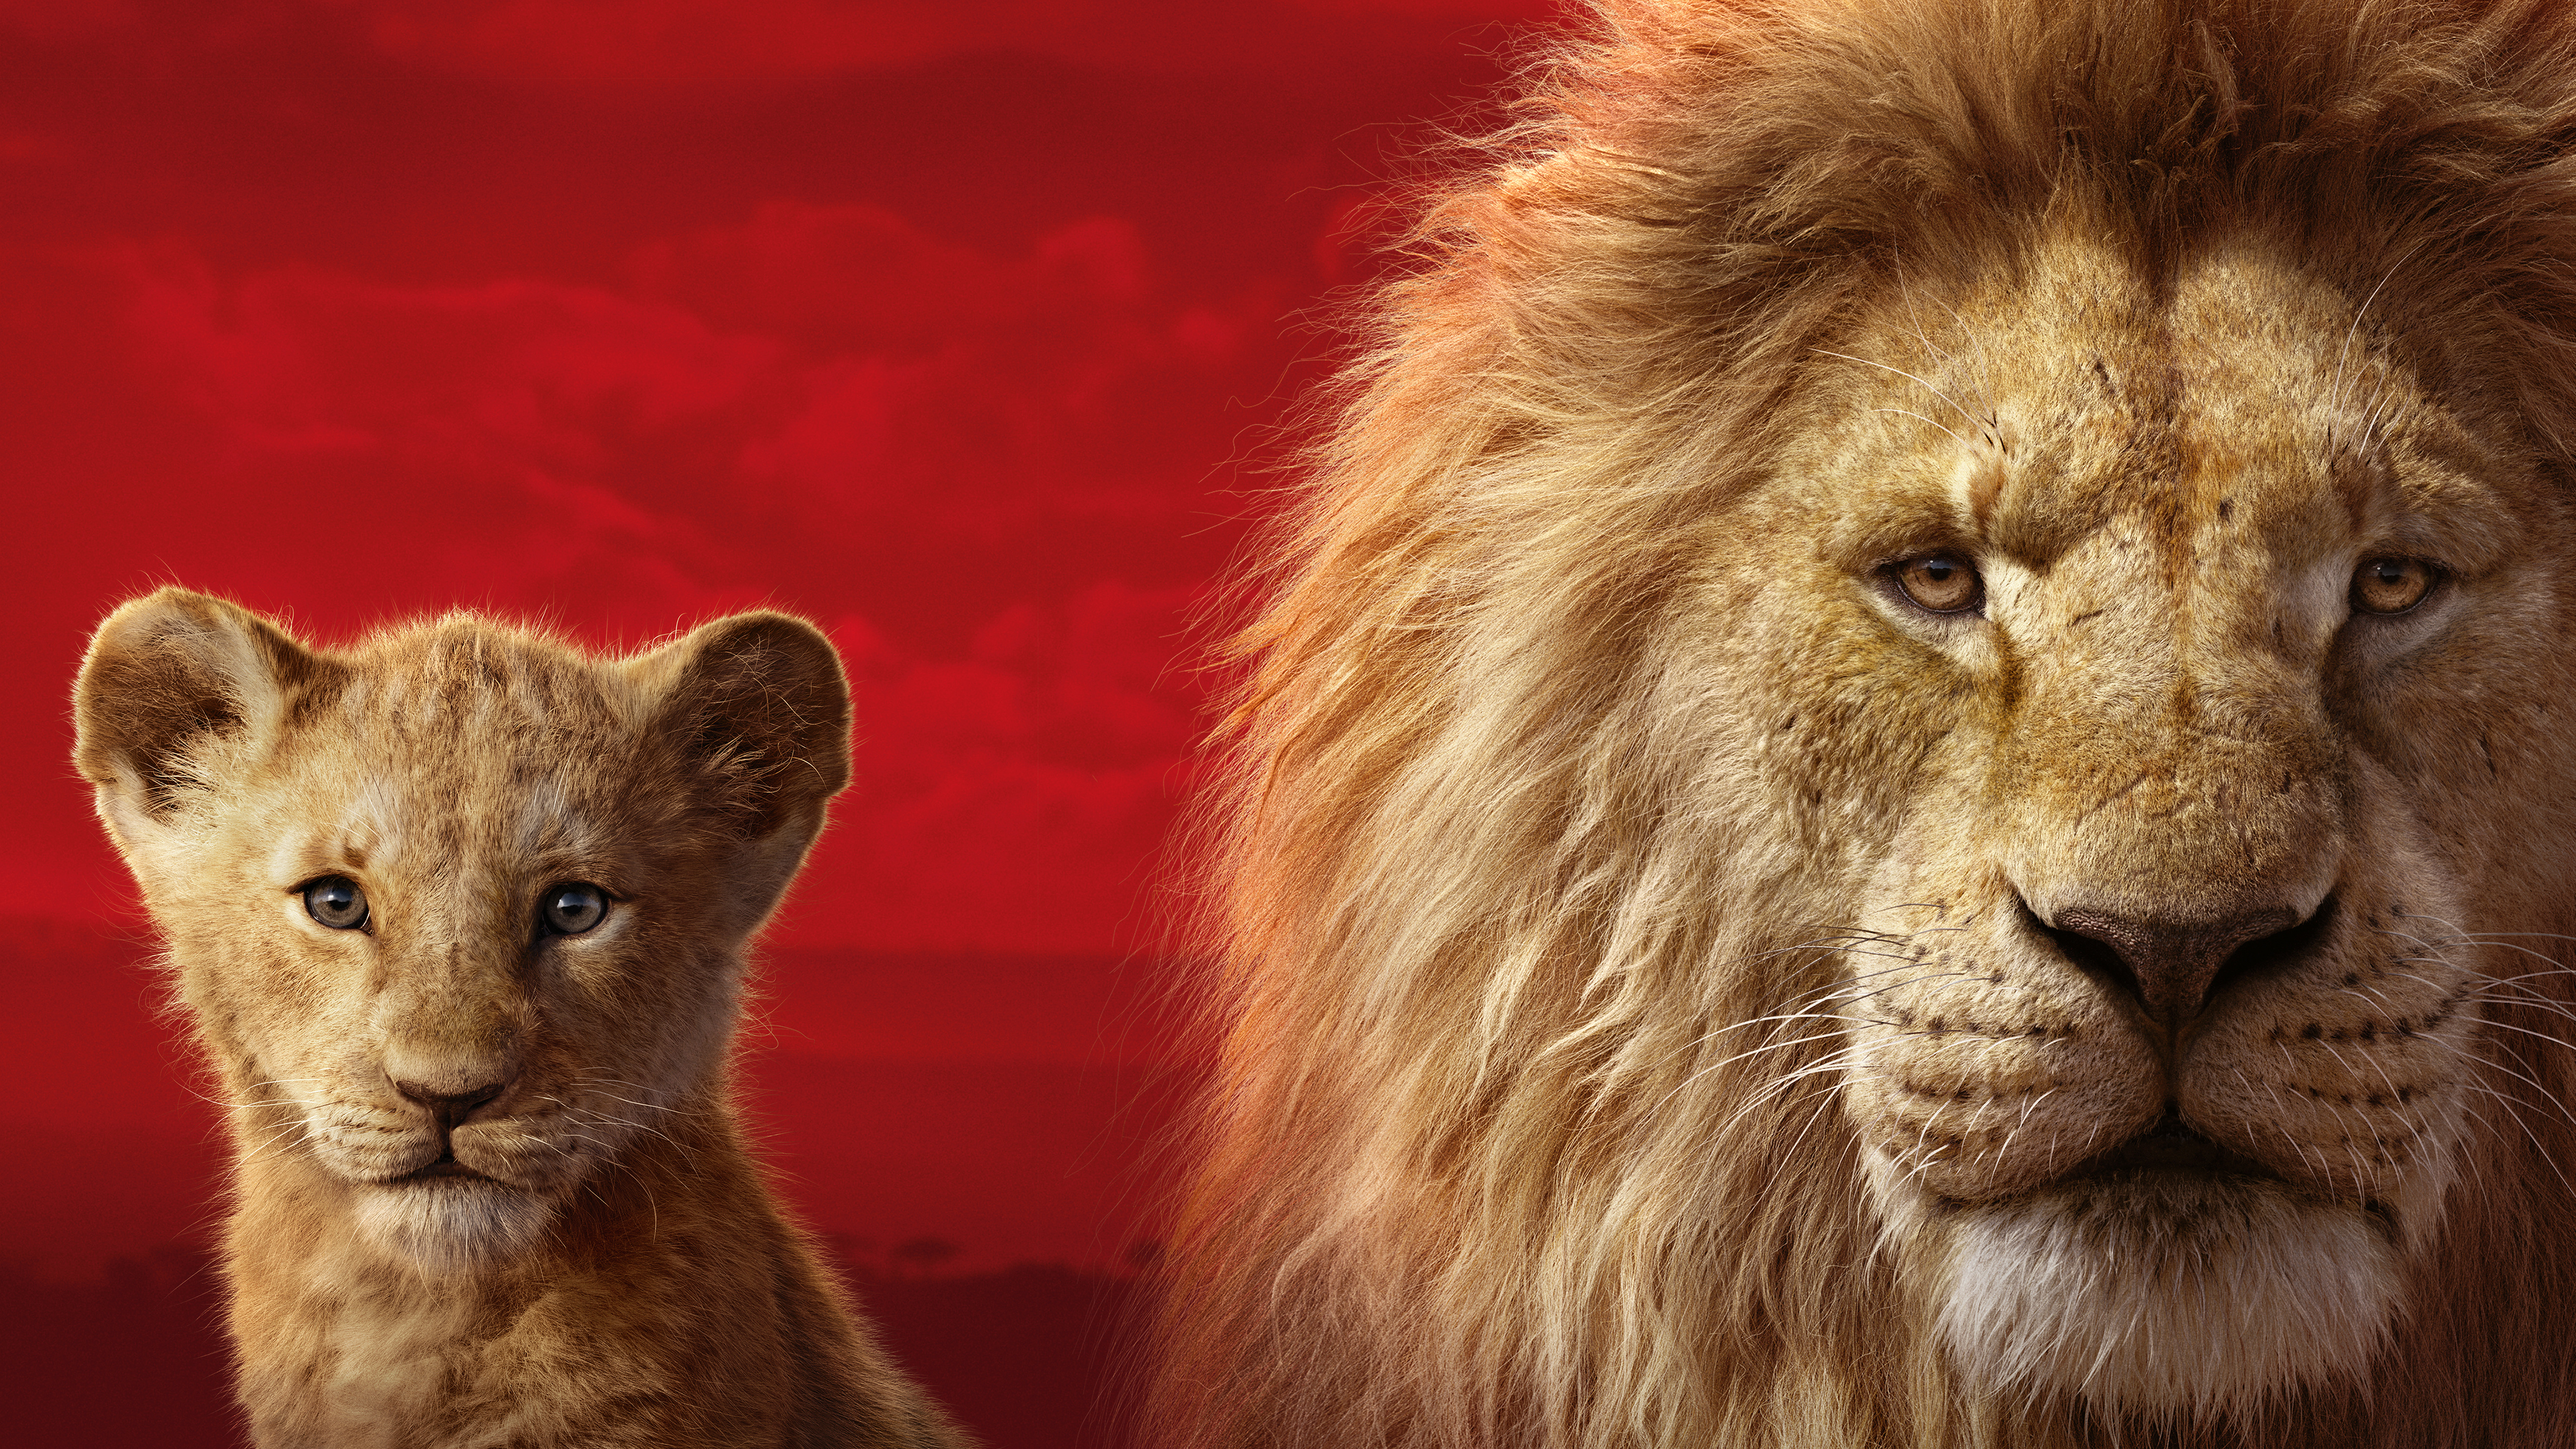 Simba Mufasa in The Lion King 5K Wallpapers | Wallpapers HD